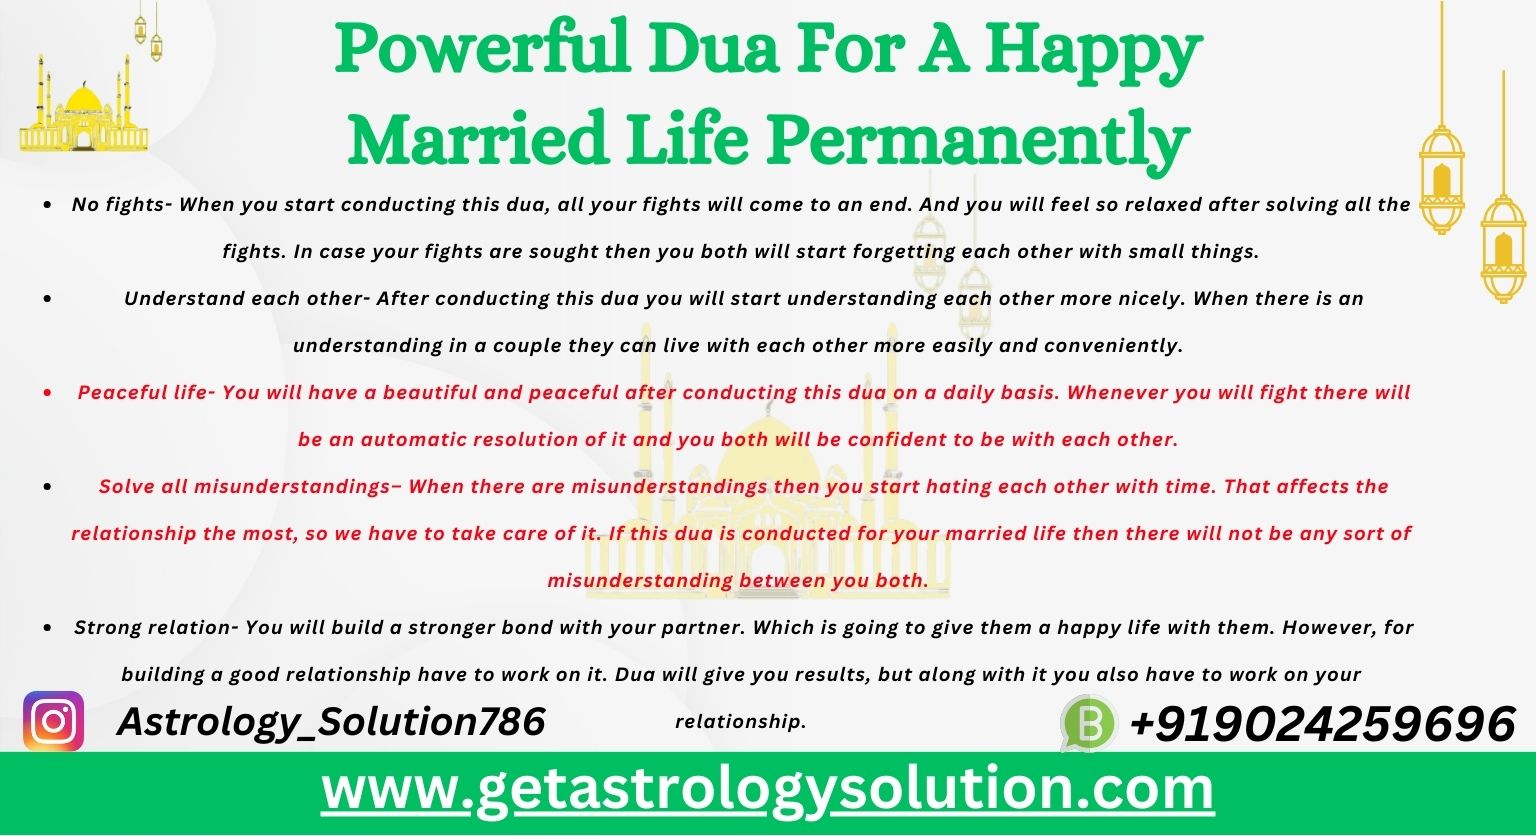 Powerful Dua For A Happy Married Life Permanently